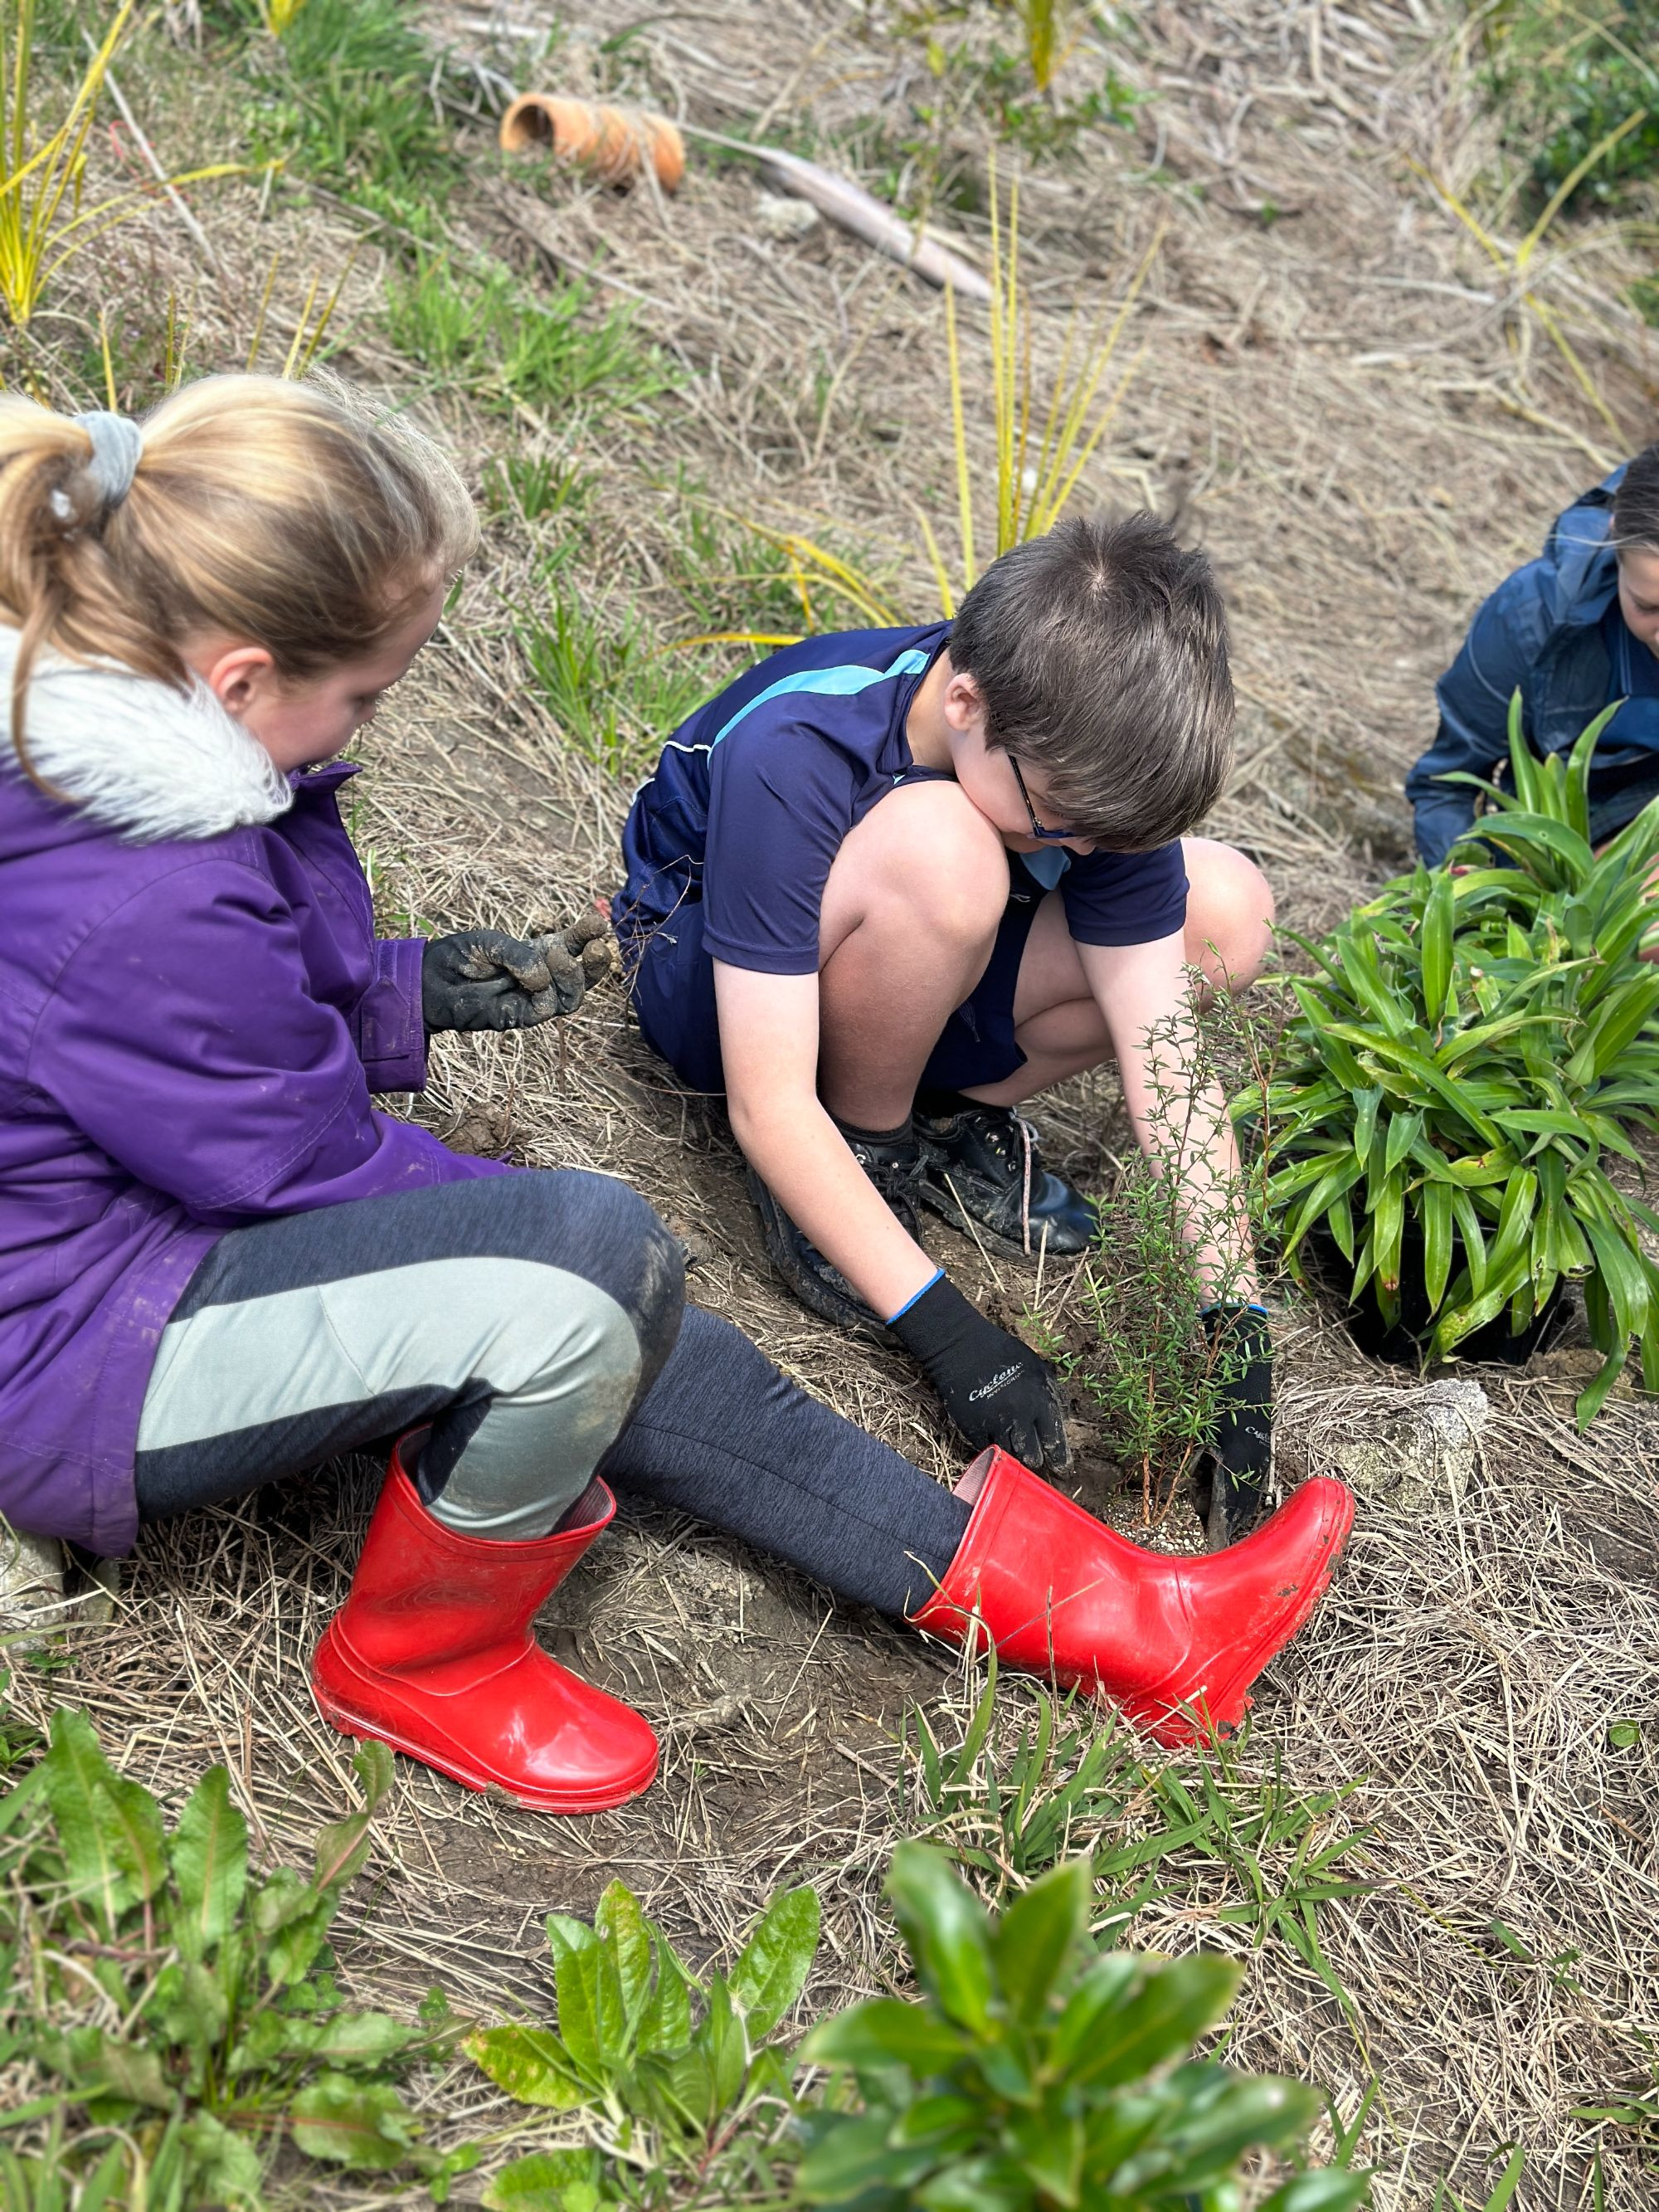 Year 7 Kaitiaki group planted 200 trees in the wetland area